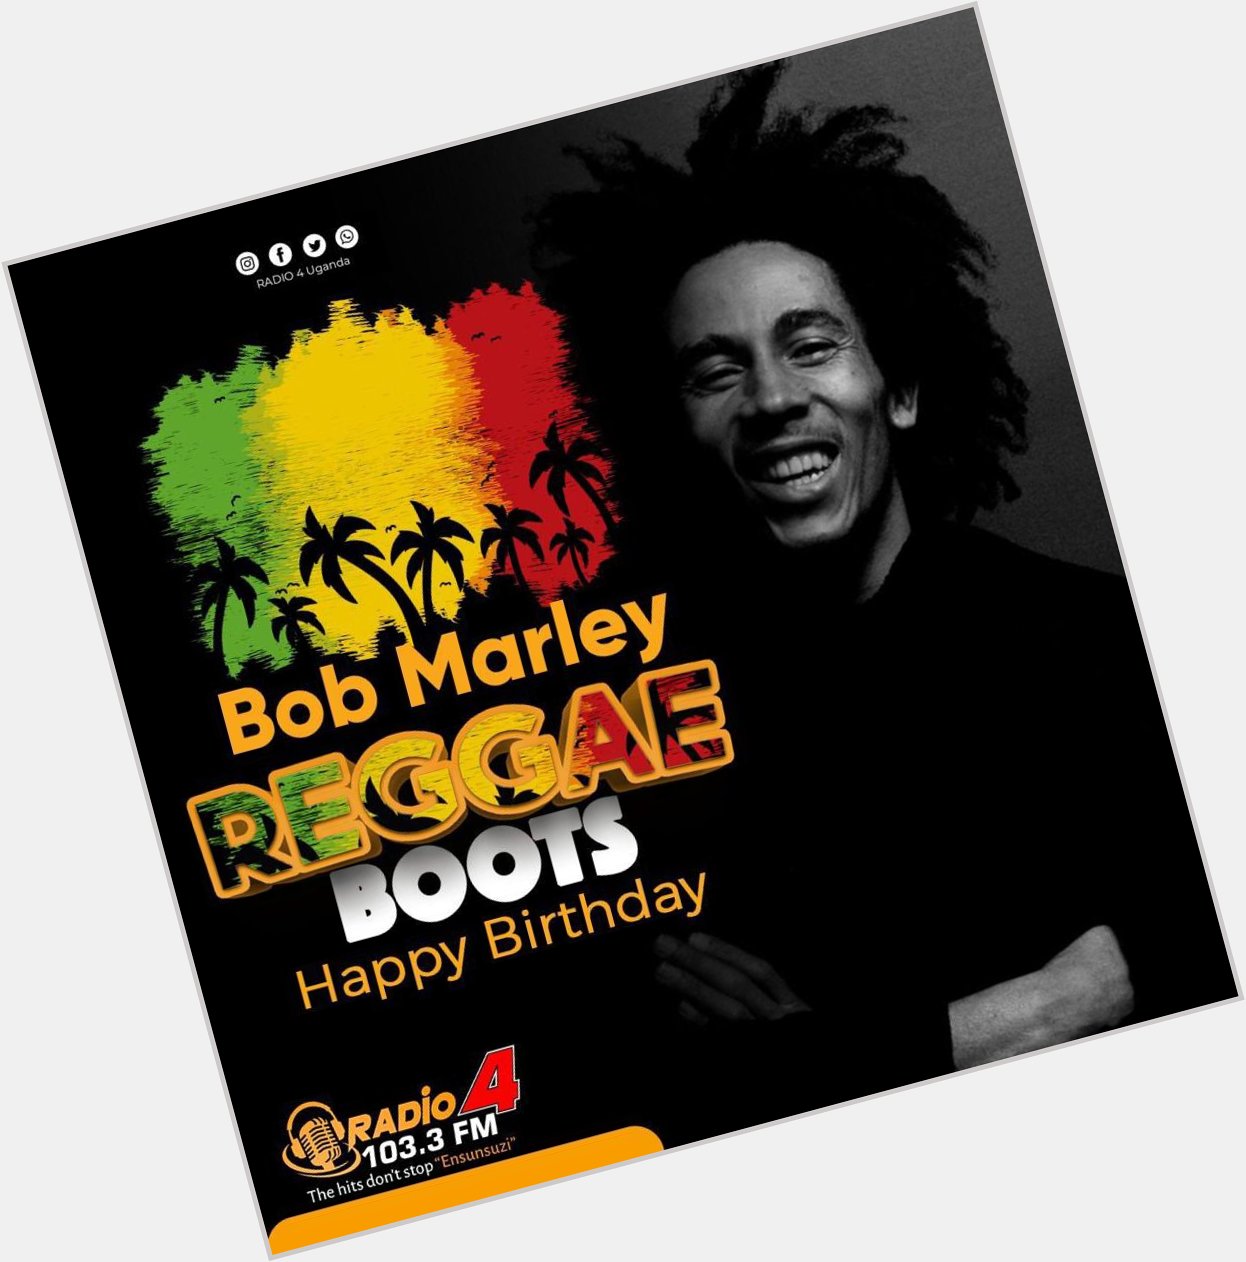 On this day, we get to celebrate the legend.

Happy Birthday, Bob Marley     | 